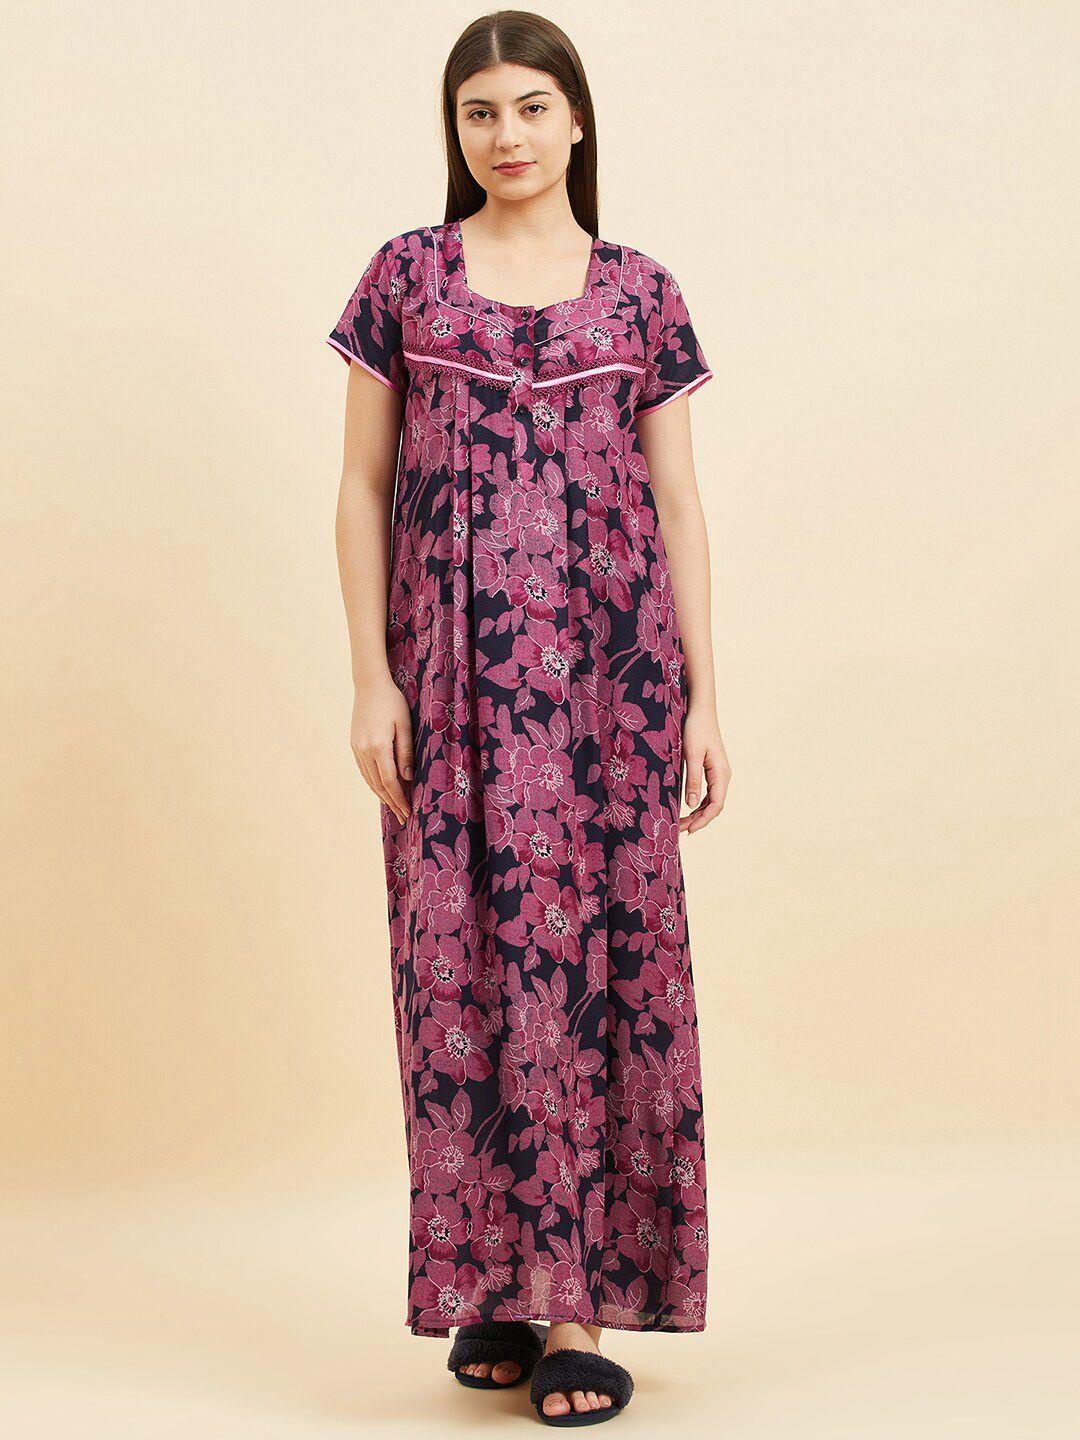 sweet-dreams-floral-printed-square-neck-pure-cotton-maxi-nightdress